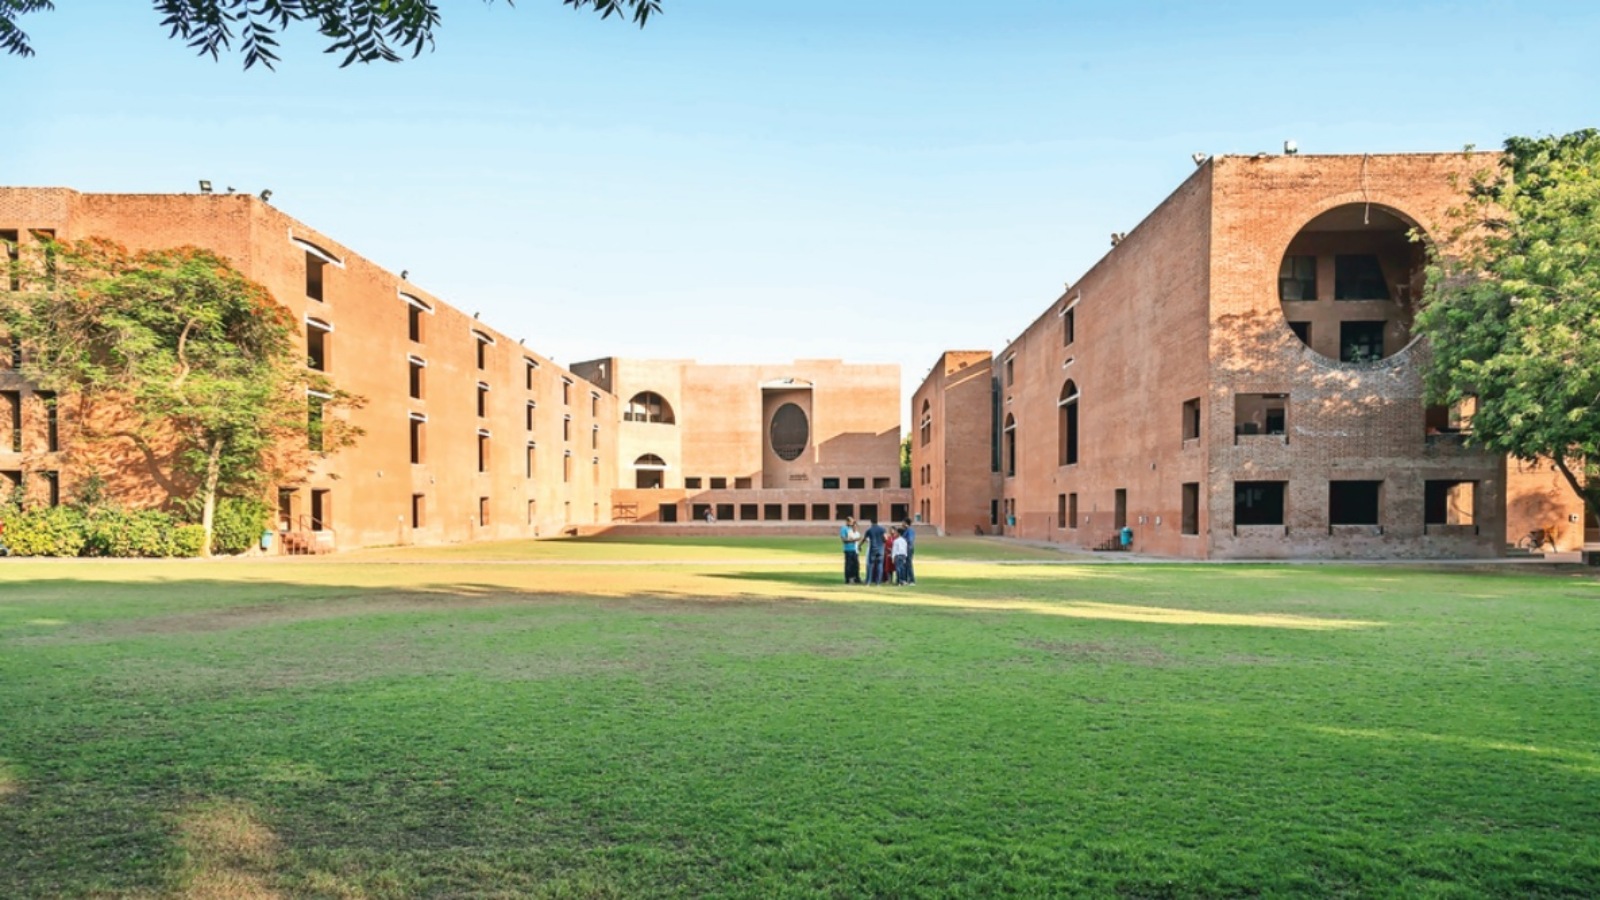 android, govt clipped powers of iim board, rejected niti advice against doing so